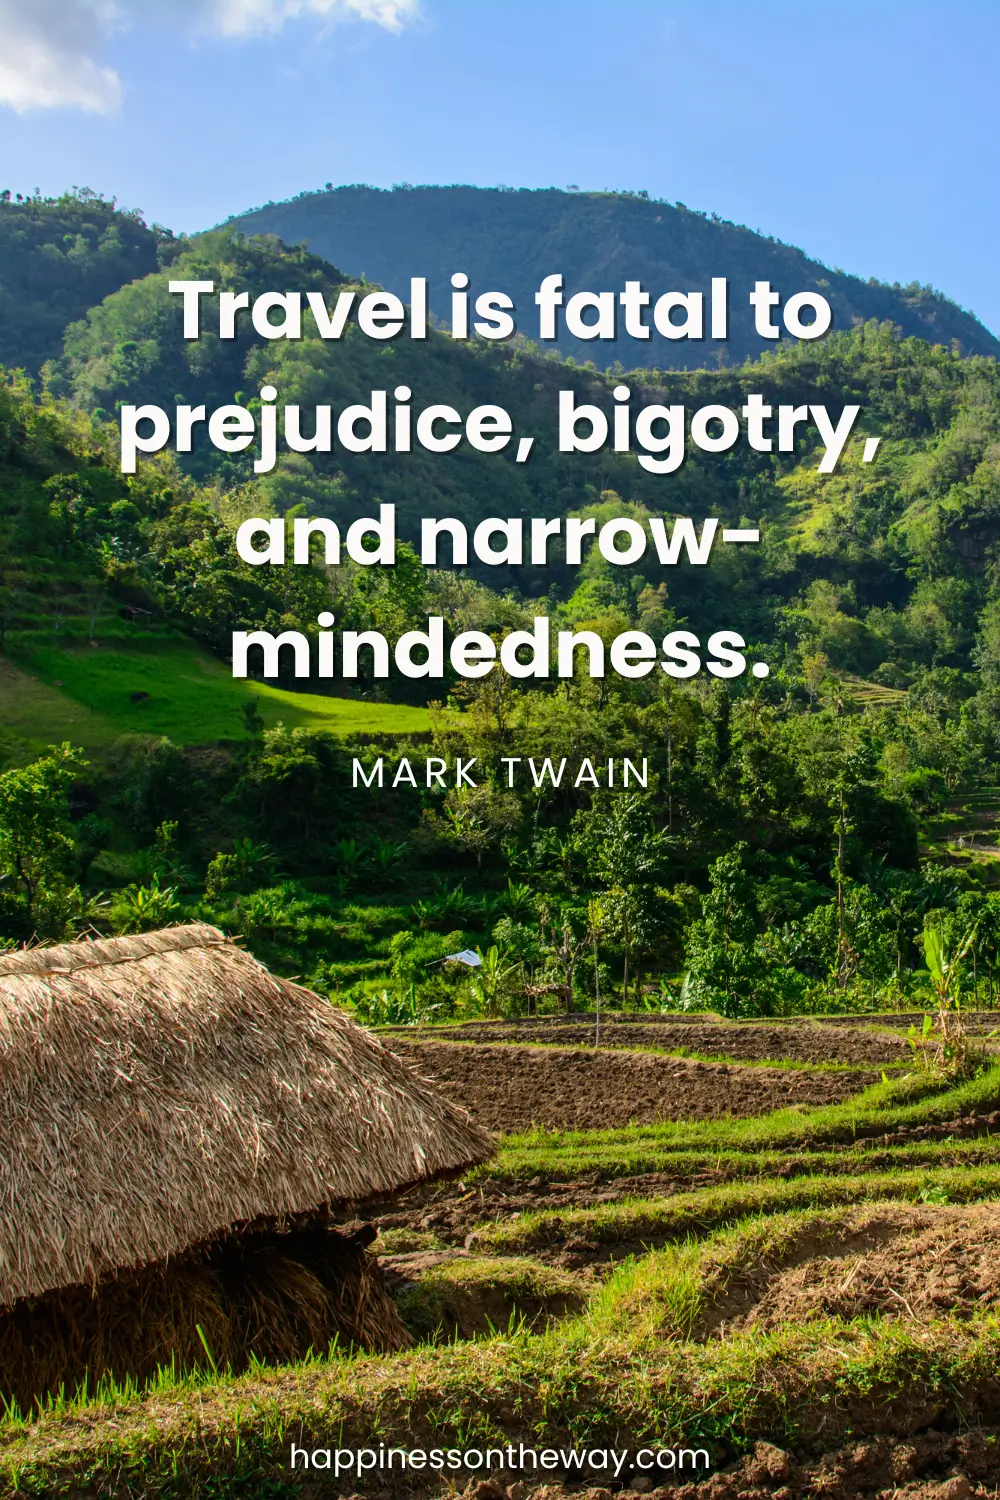 A thatched hut amidst lush green Bali Rice Terraces with the quote 'Travel is fatal to prejudice, bigotry, and narrow-mindedness. – Mark Twain